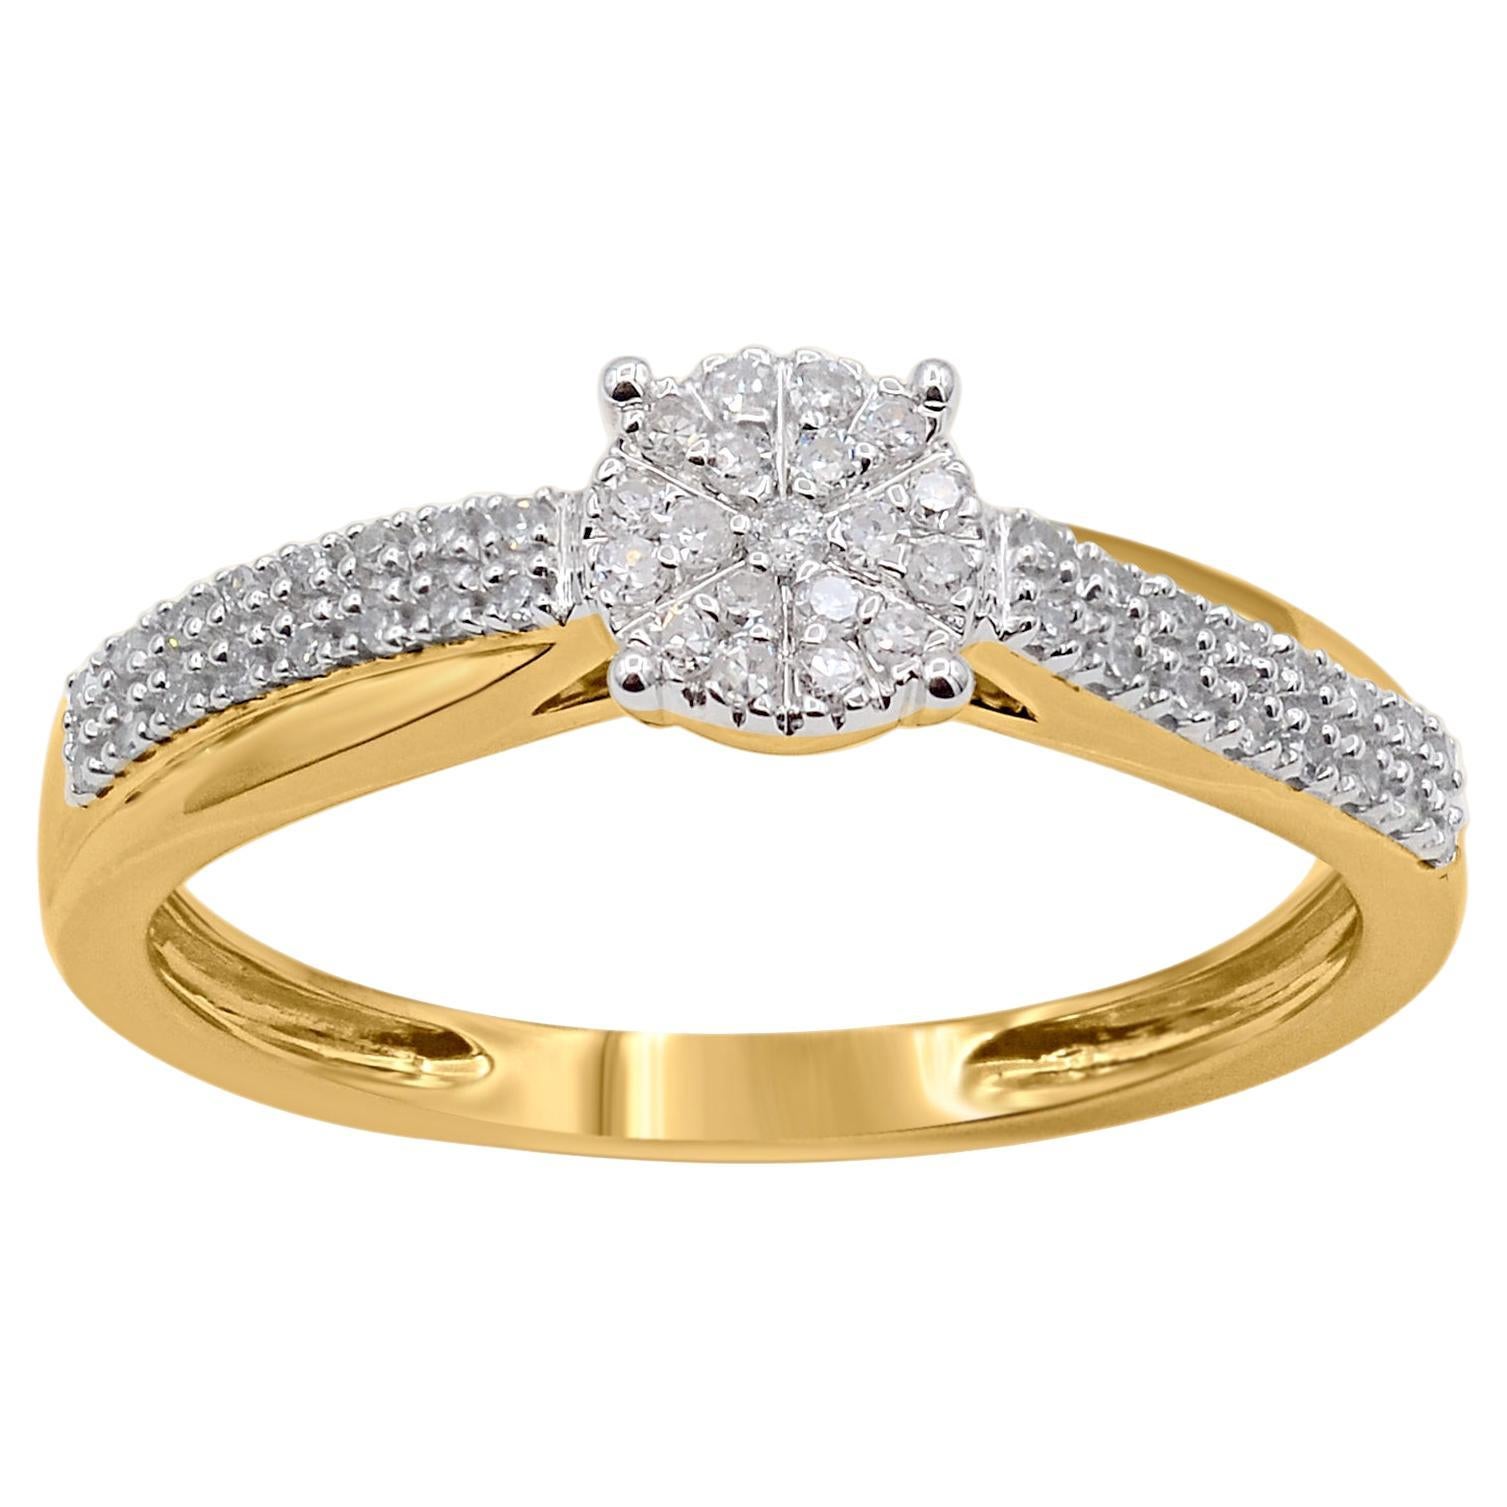 TJD 0.15 Carat Natural Round Diamond Engagement Ring in 14KT Yellow Gold